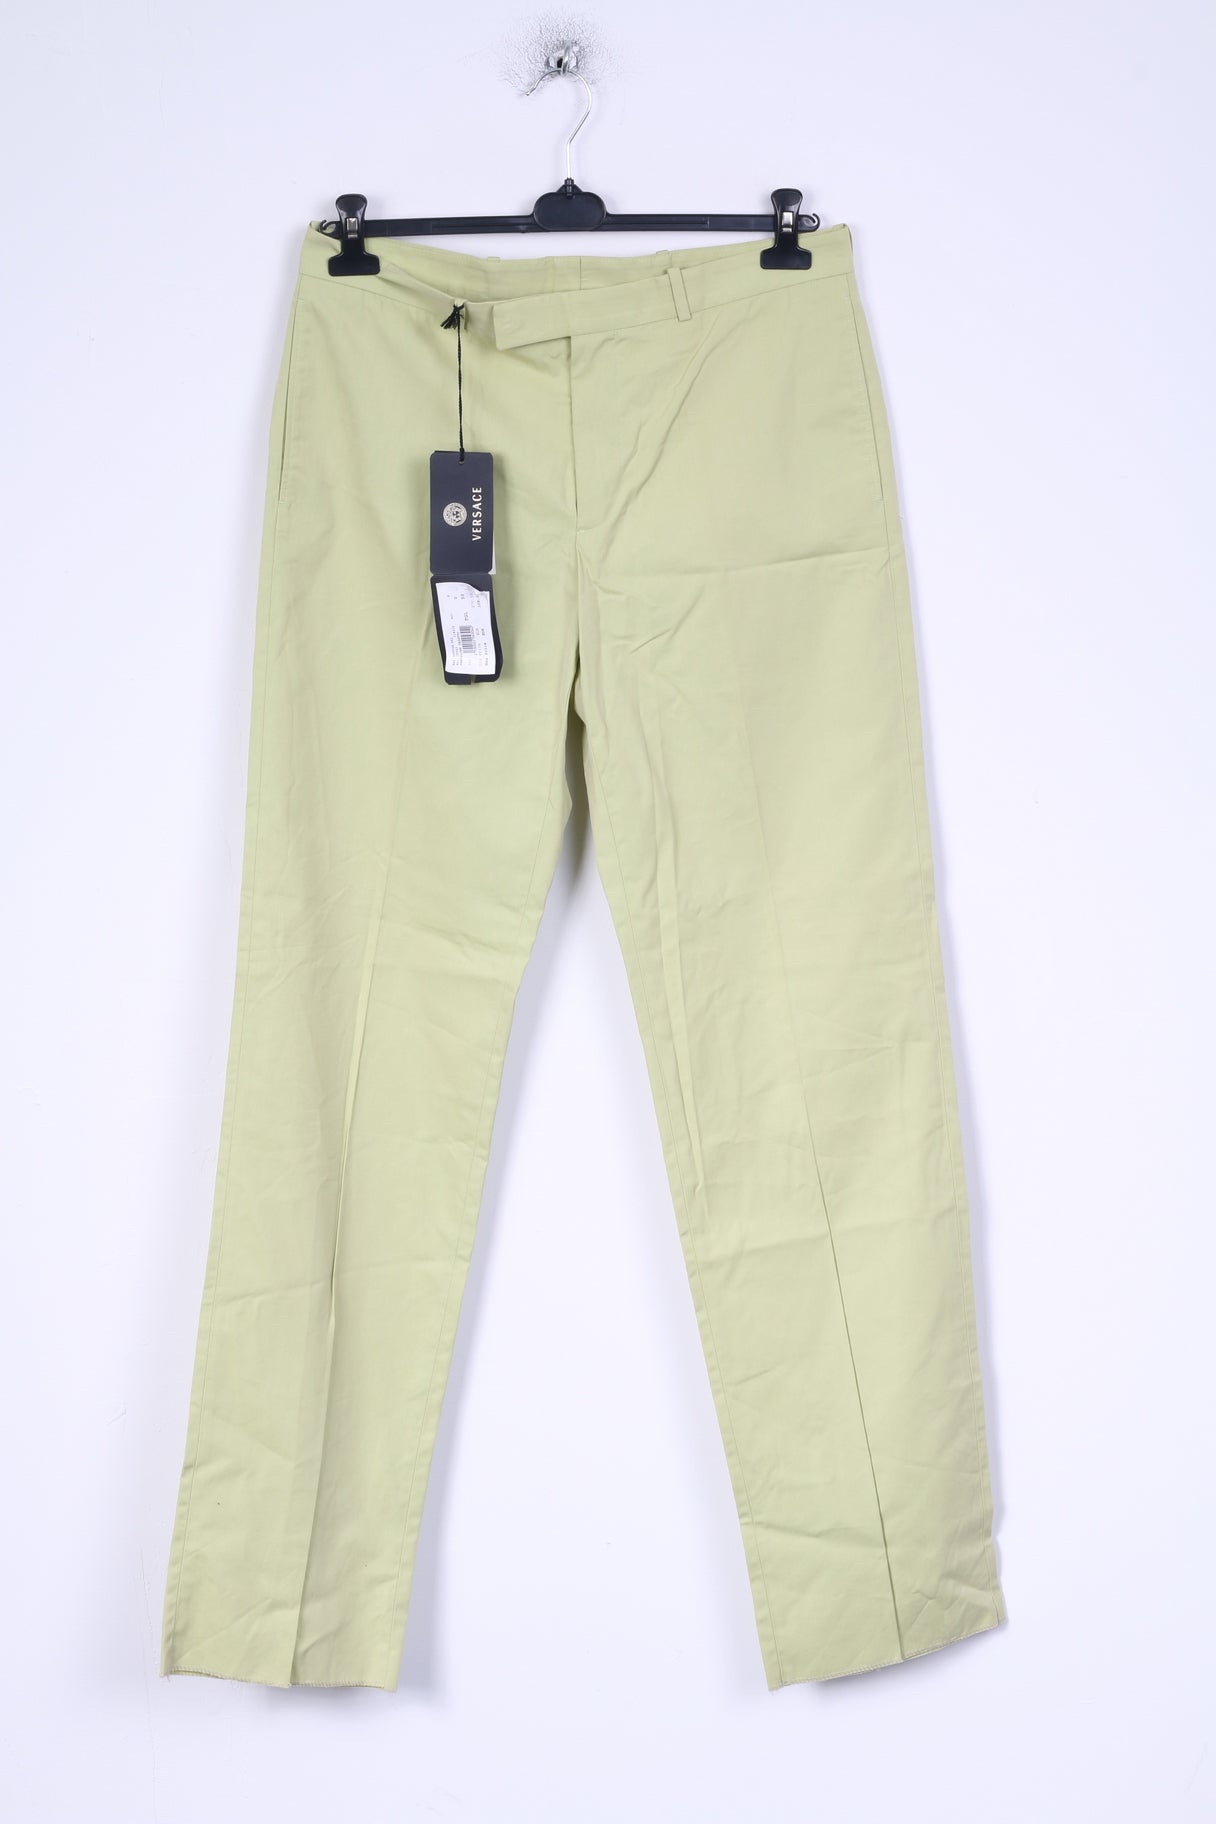 New Versace Mens 50 Trousers Olive Cotton Elegant Italy Gianni Pants